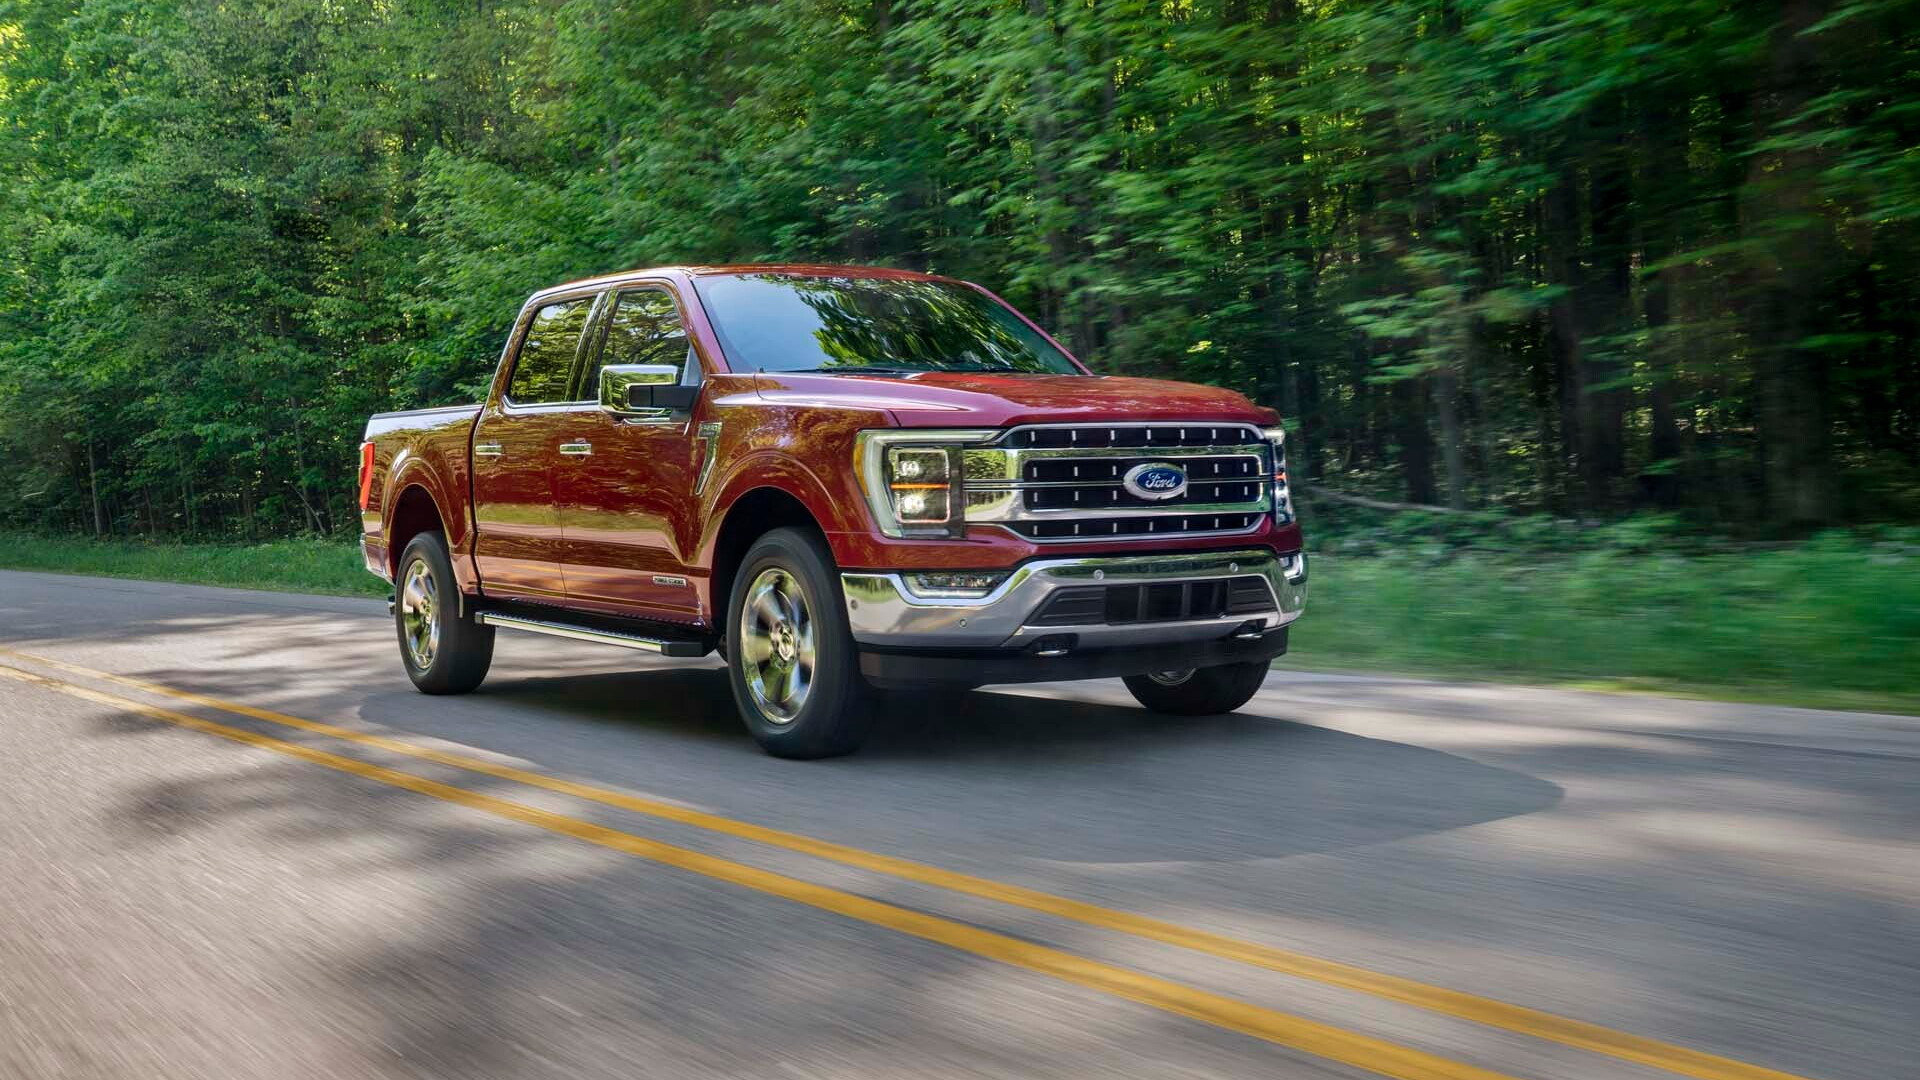 2021 Ford F-150 Hybrid: Just 23 mpg, but can power a worksite